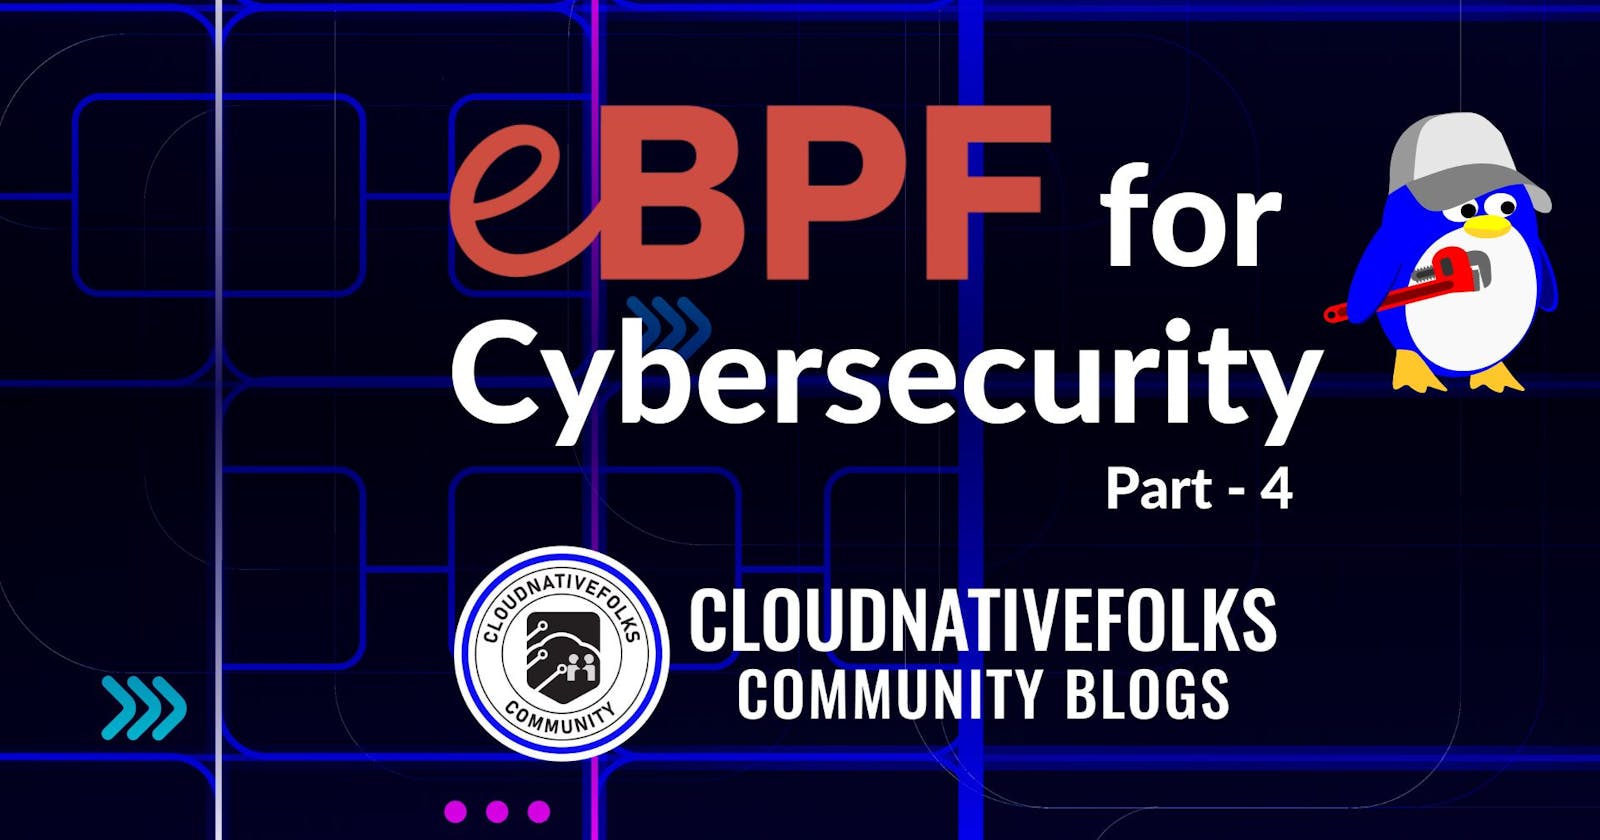 eBPF for Cybersecurity - Part 4